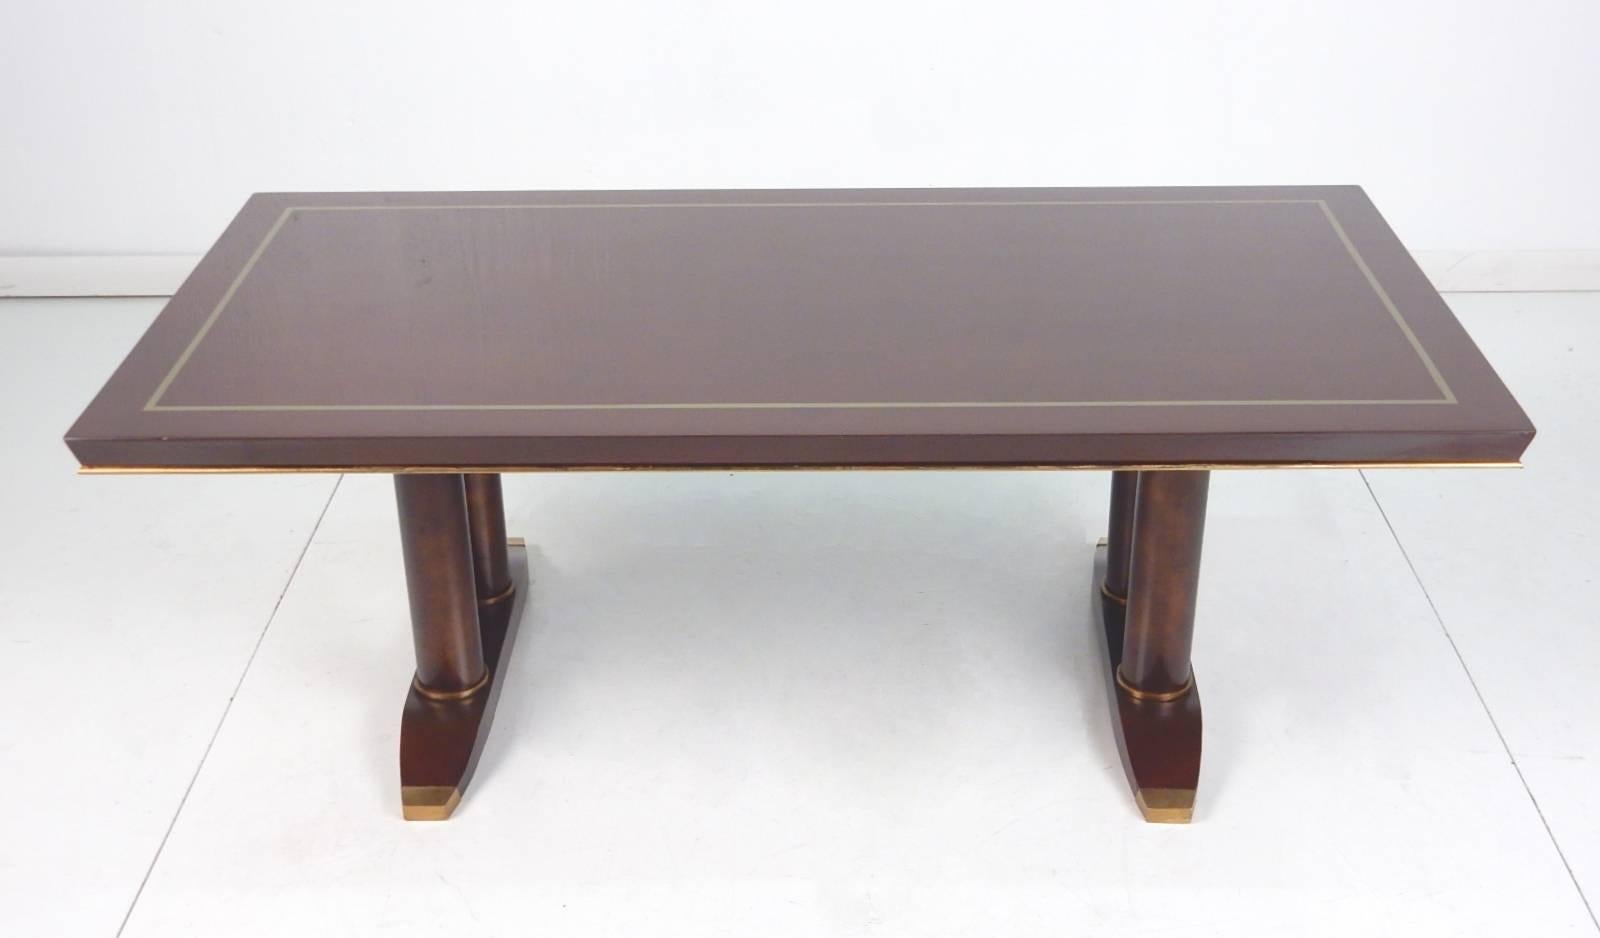 Art Deco French Lacquer Coffee Table by Designer Batistin Spade 1